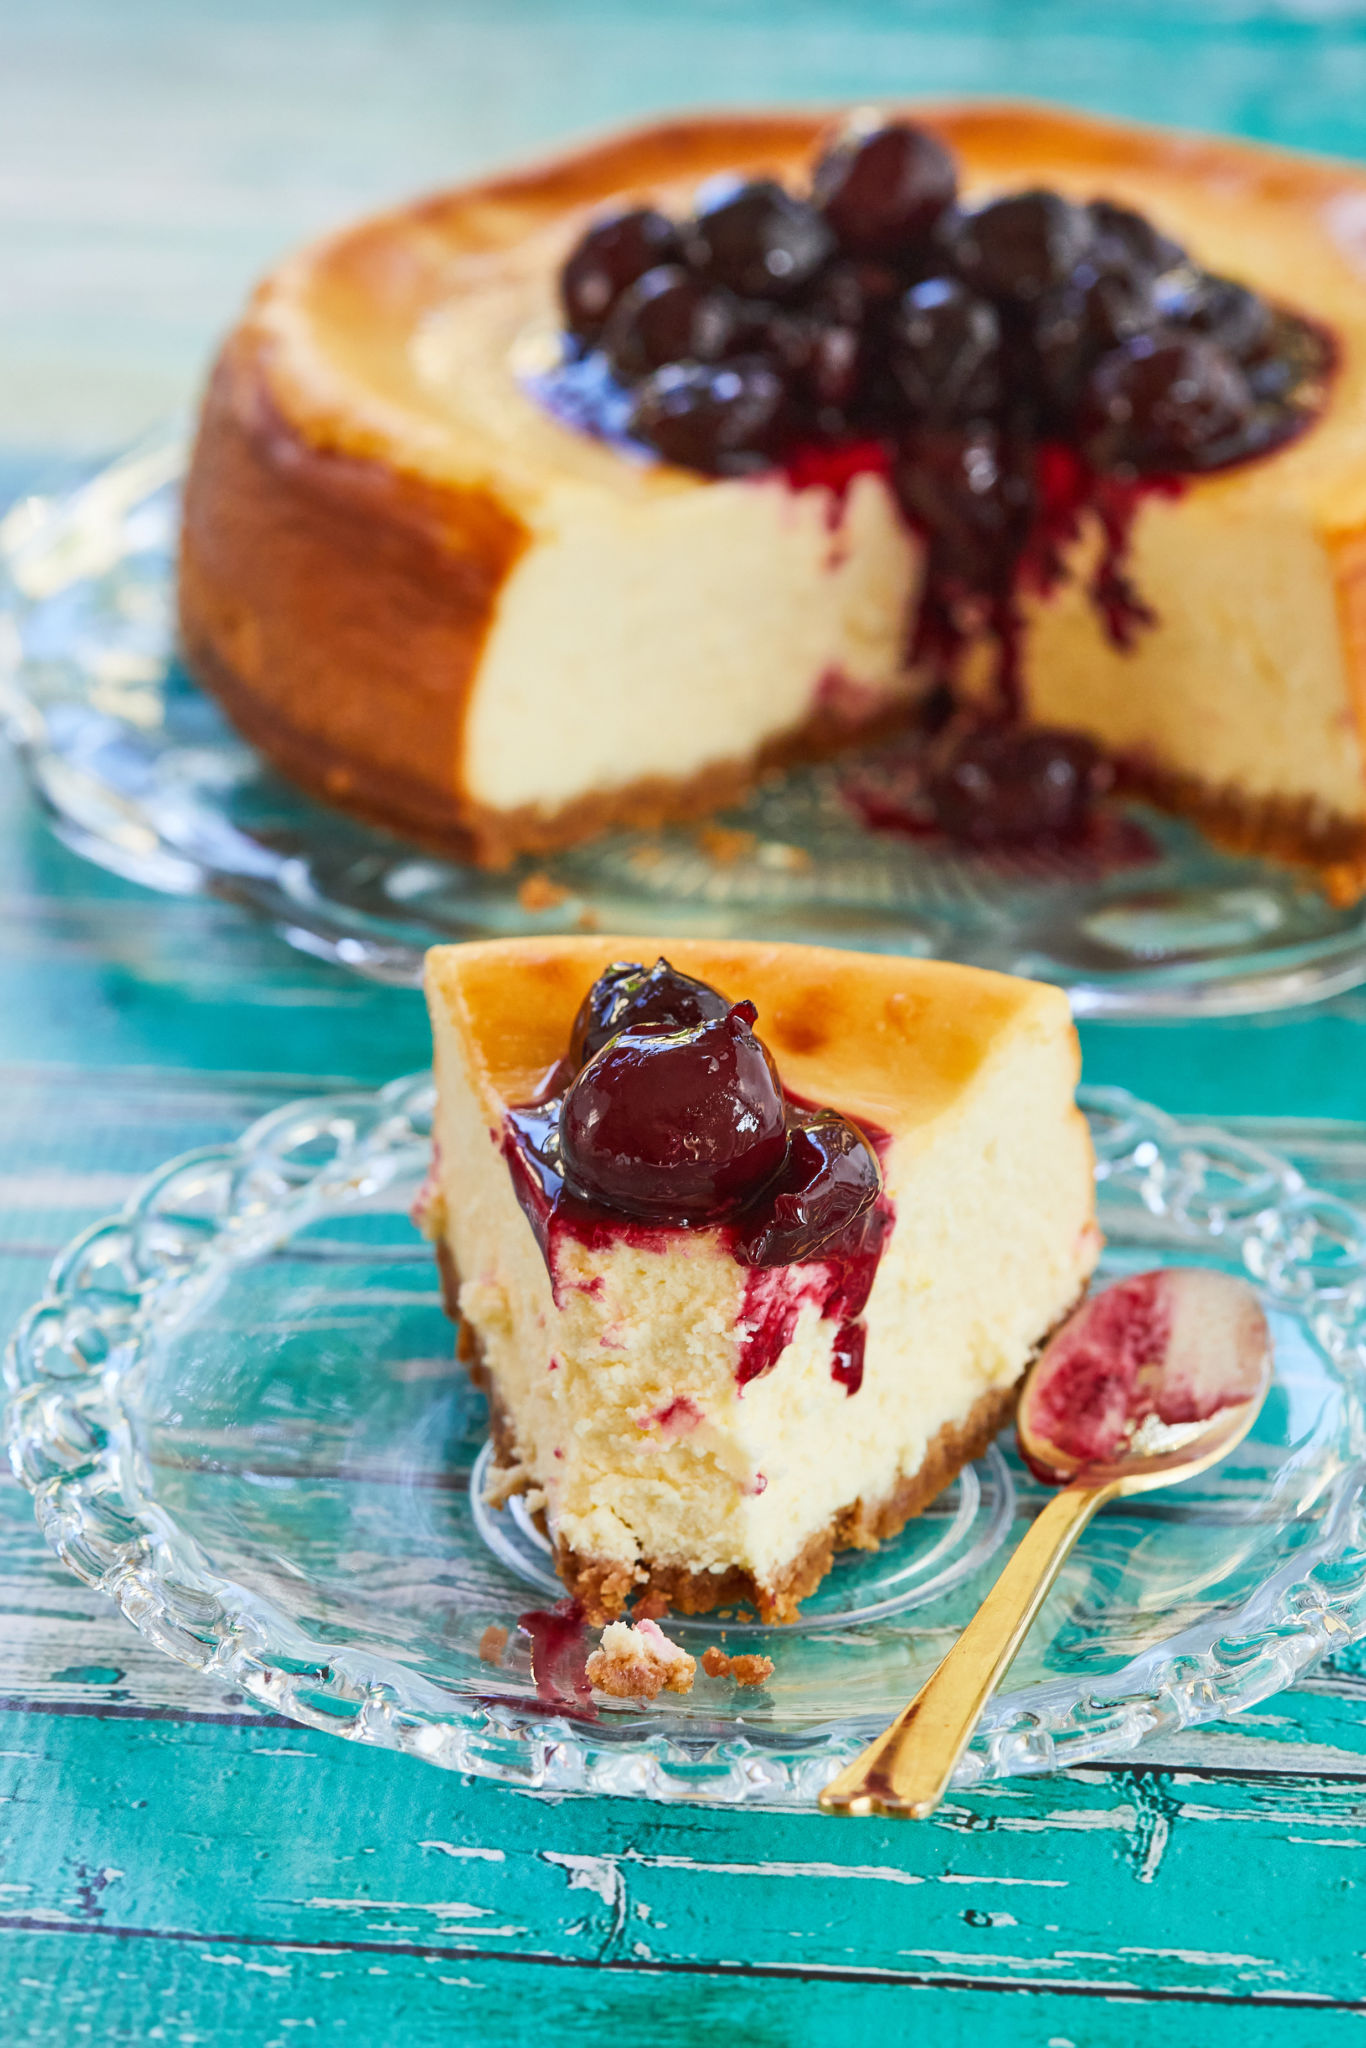 A slice of Best-Ever New York Cheesecake topped with cherries.